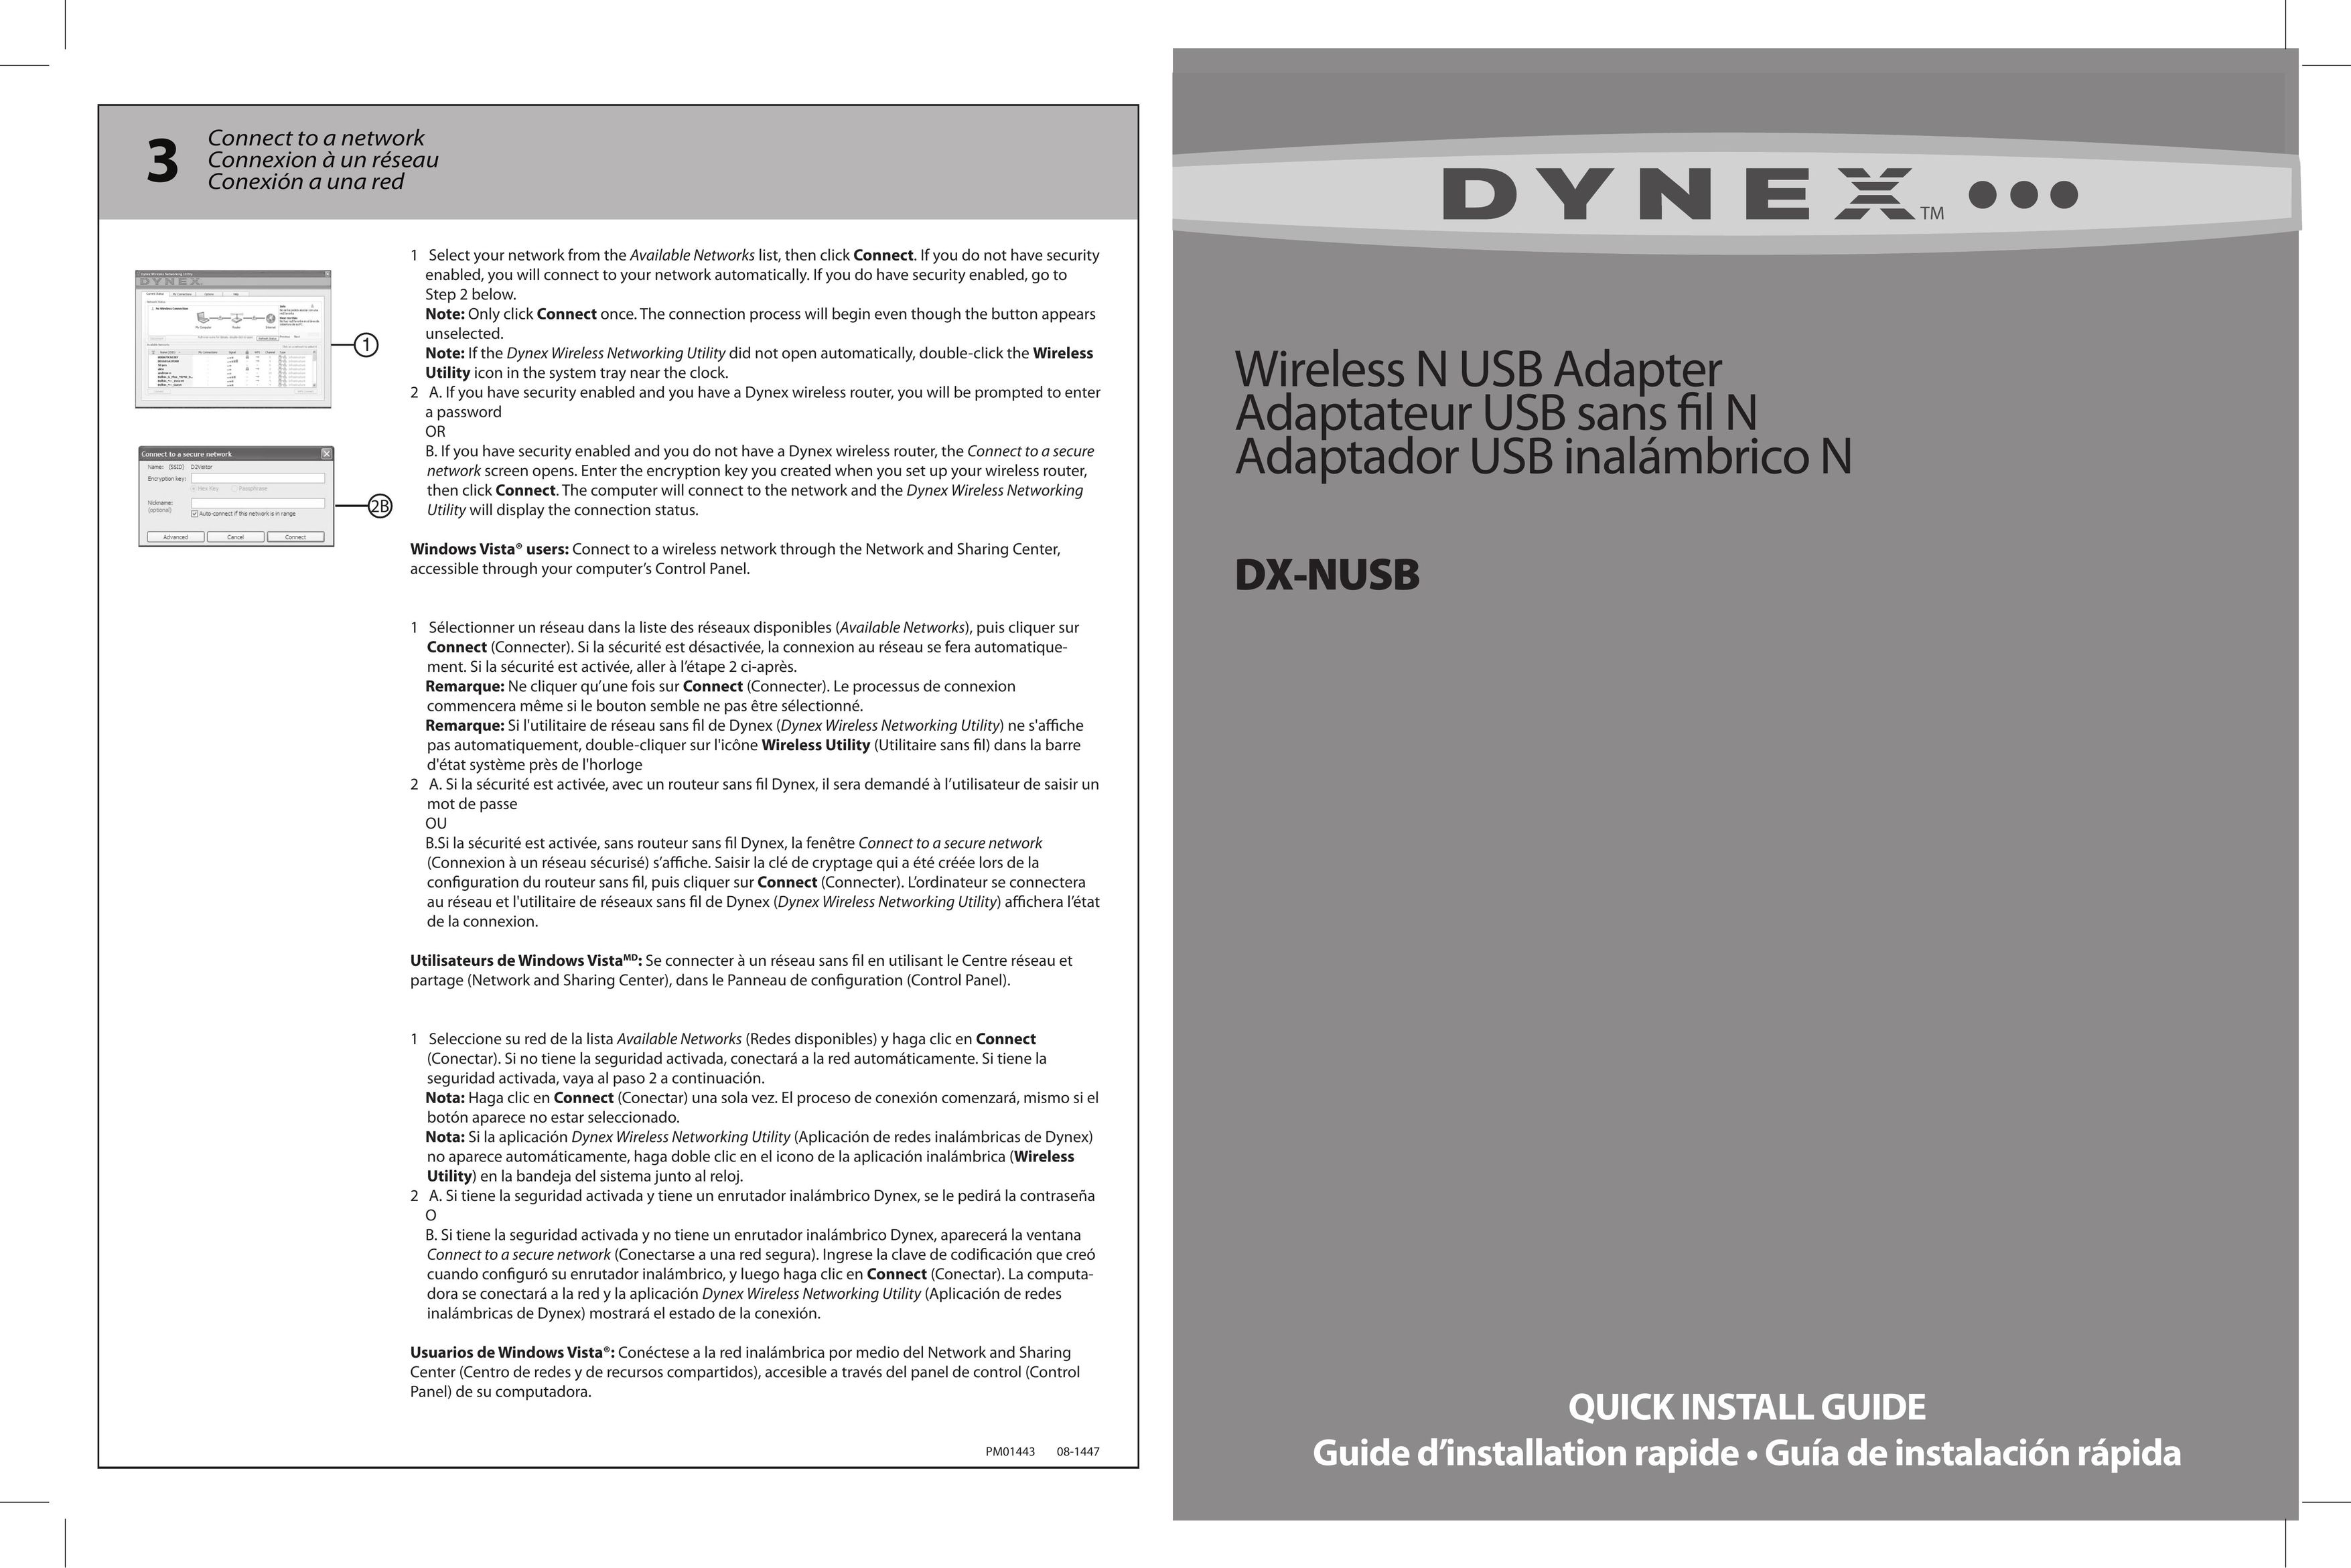 Dynex DX-NUSB Network Card User Manual (Page 1)